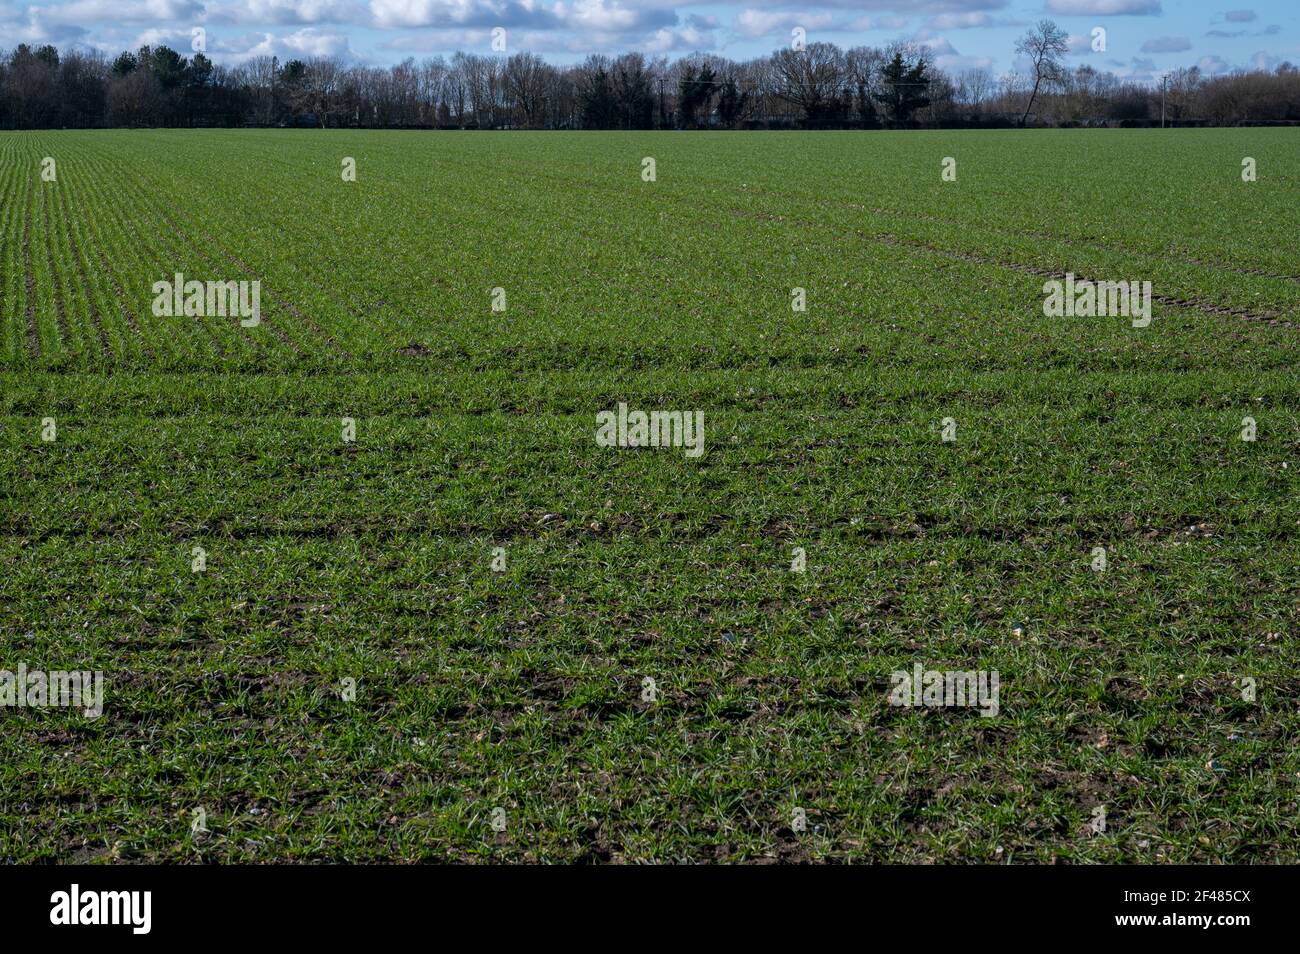 Farmers field with the young shoots of barley growing Stock Photo